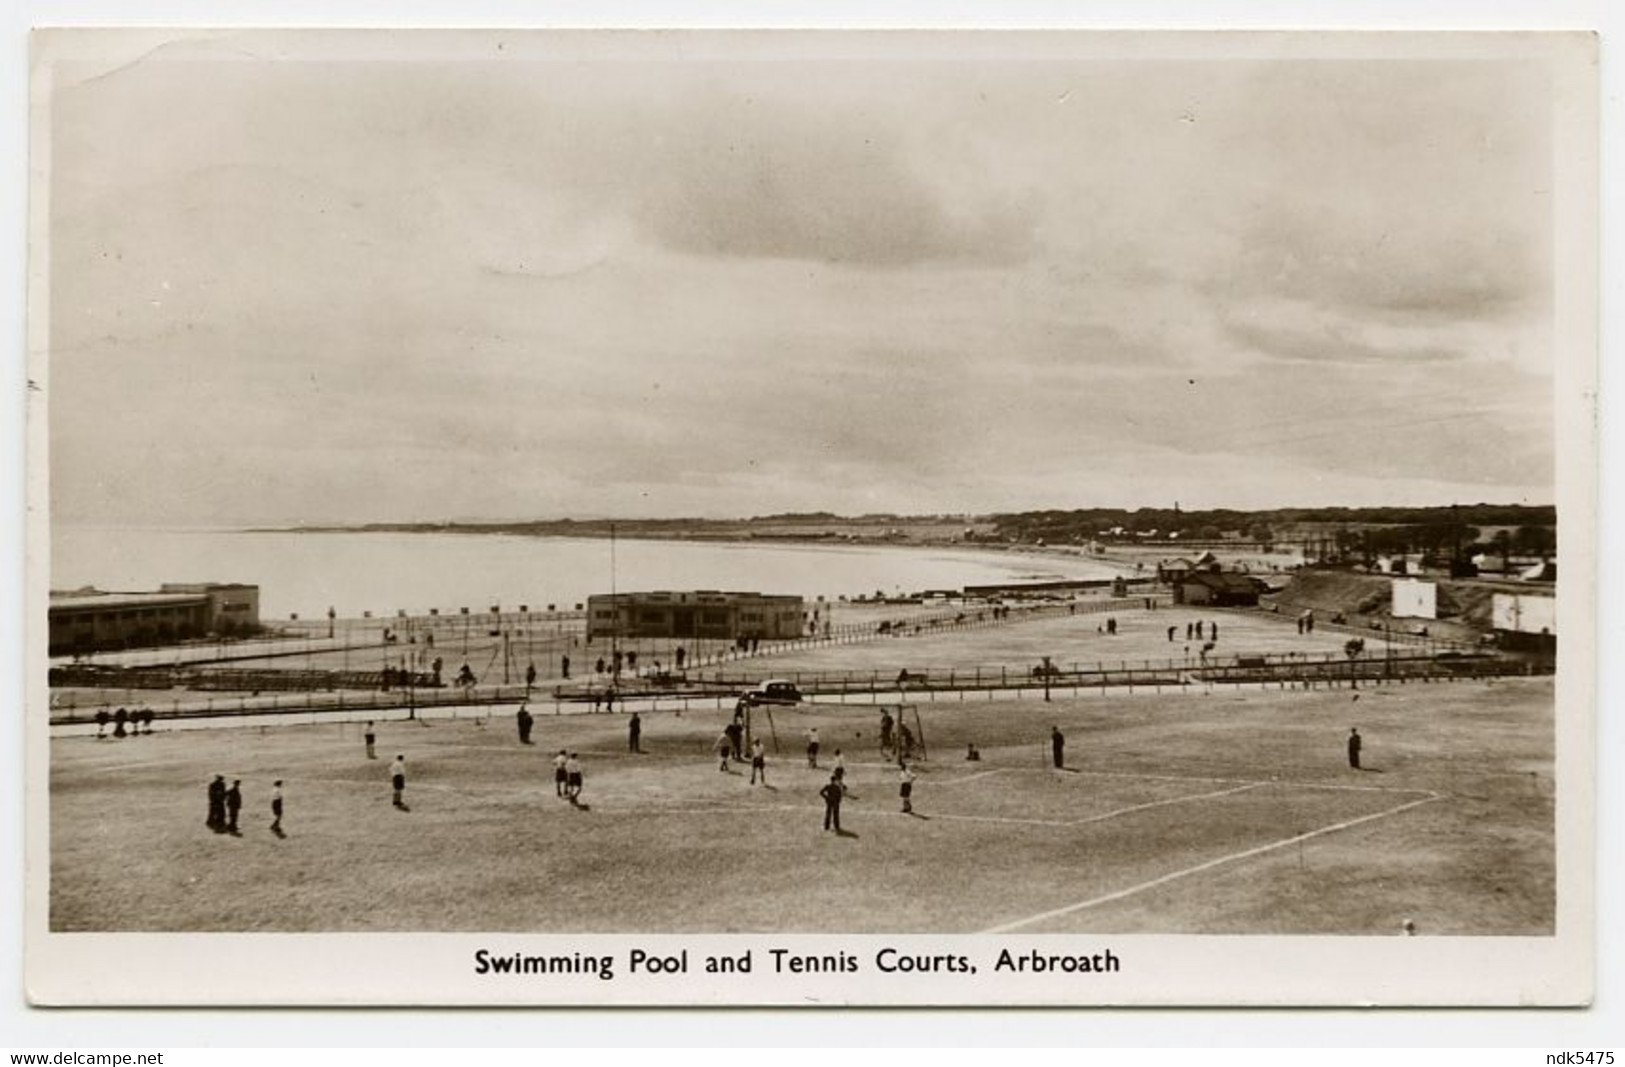 ARBROATH : SWIMMING POOL AND TENNIS COURTS / ADDRESS - CARTERTON, BURFORD ROAD, ASCOT HOUSE (MELVILLE) - Angus